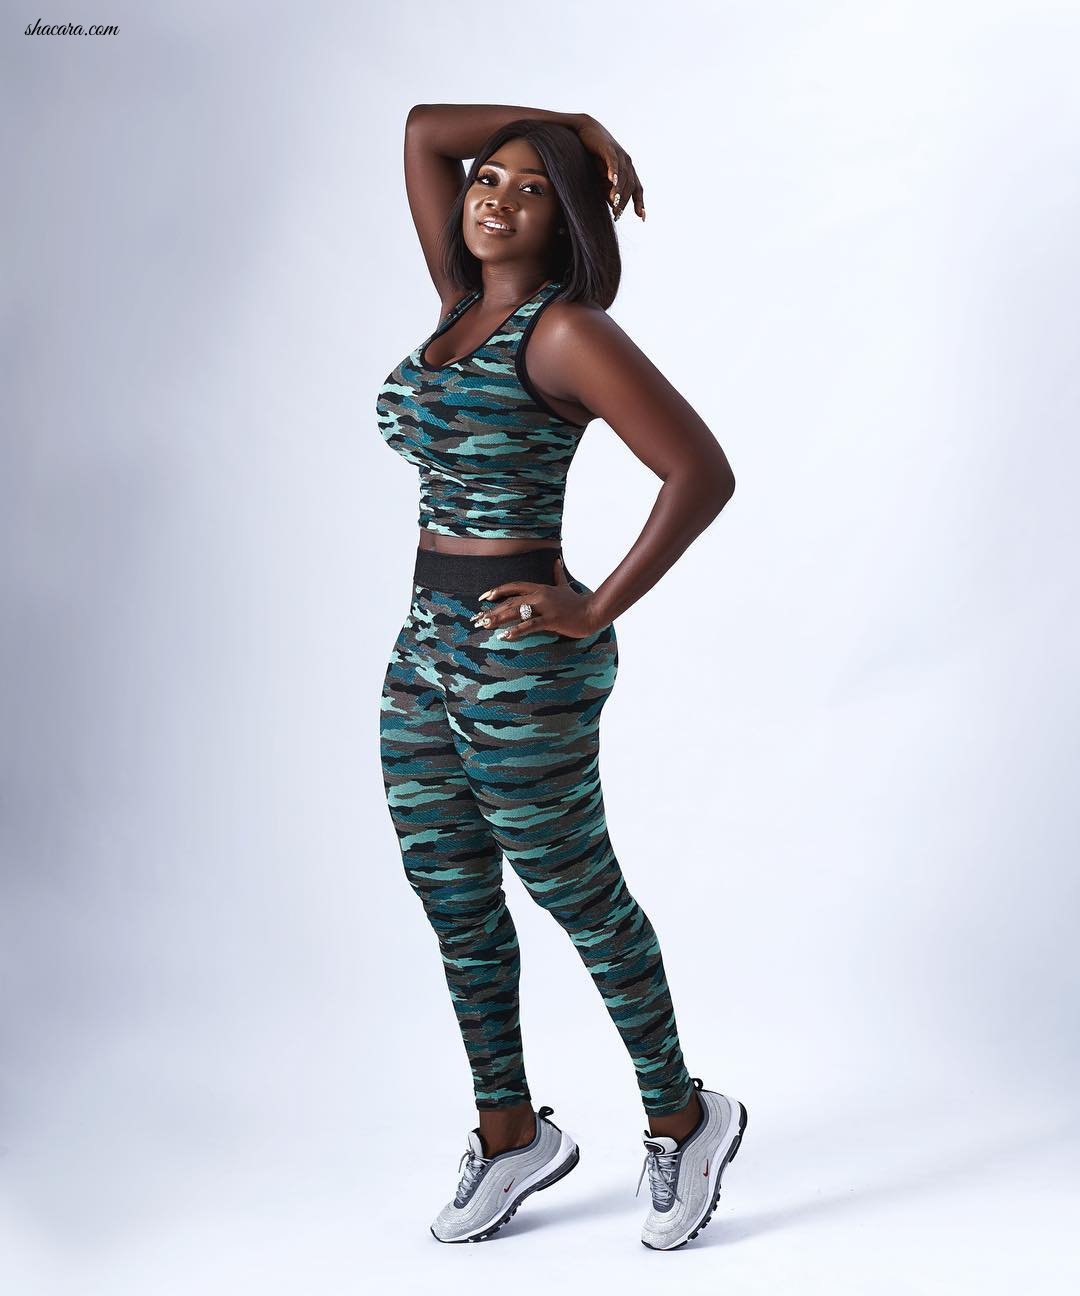 Mercy Johnson-Okojie Is Launching A New Weight Loss Project Tagged “Mercy Magic”